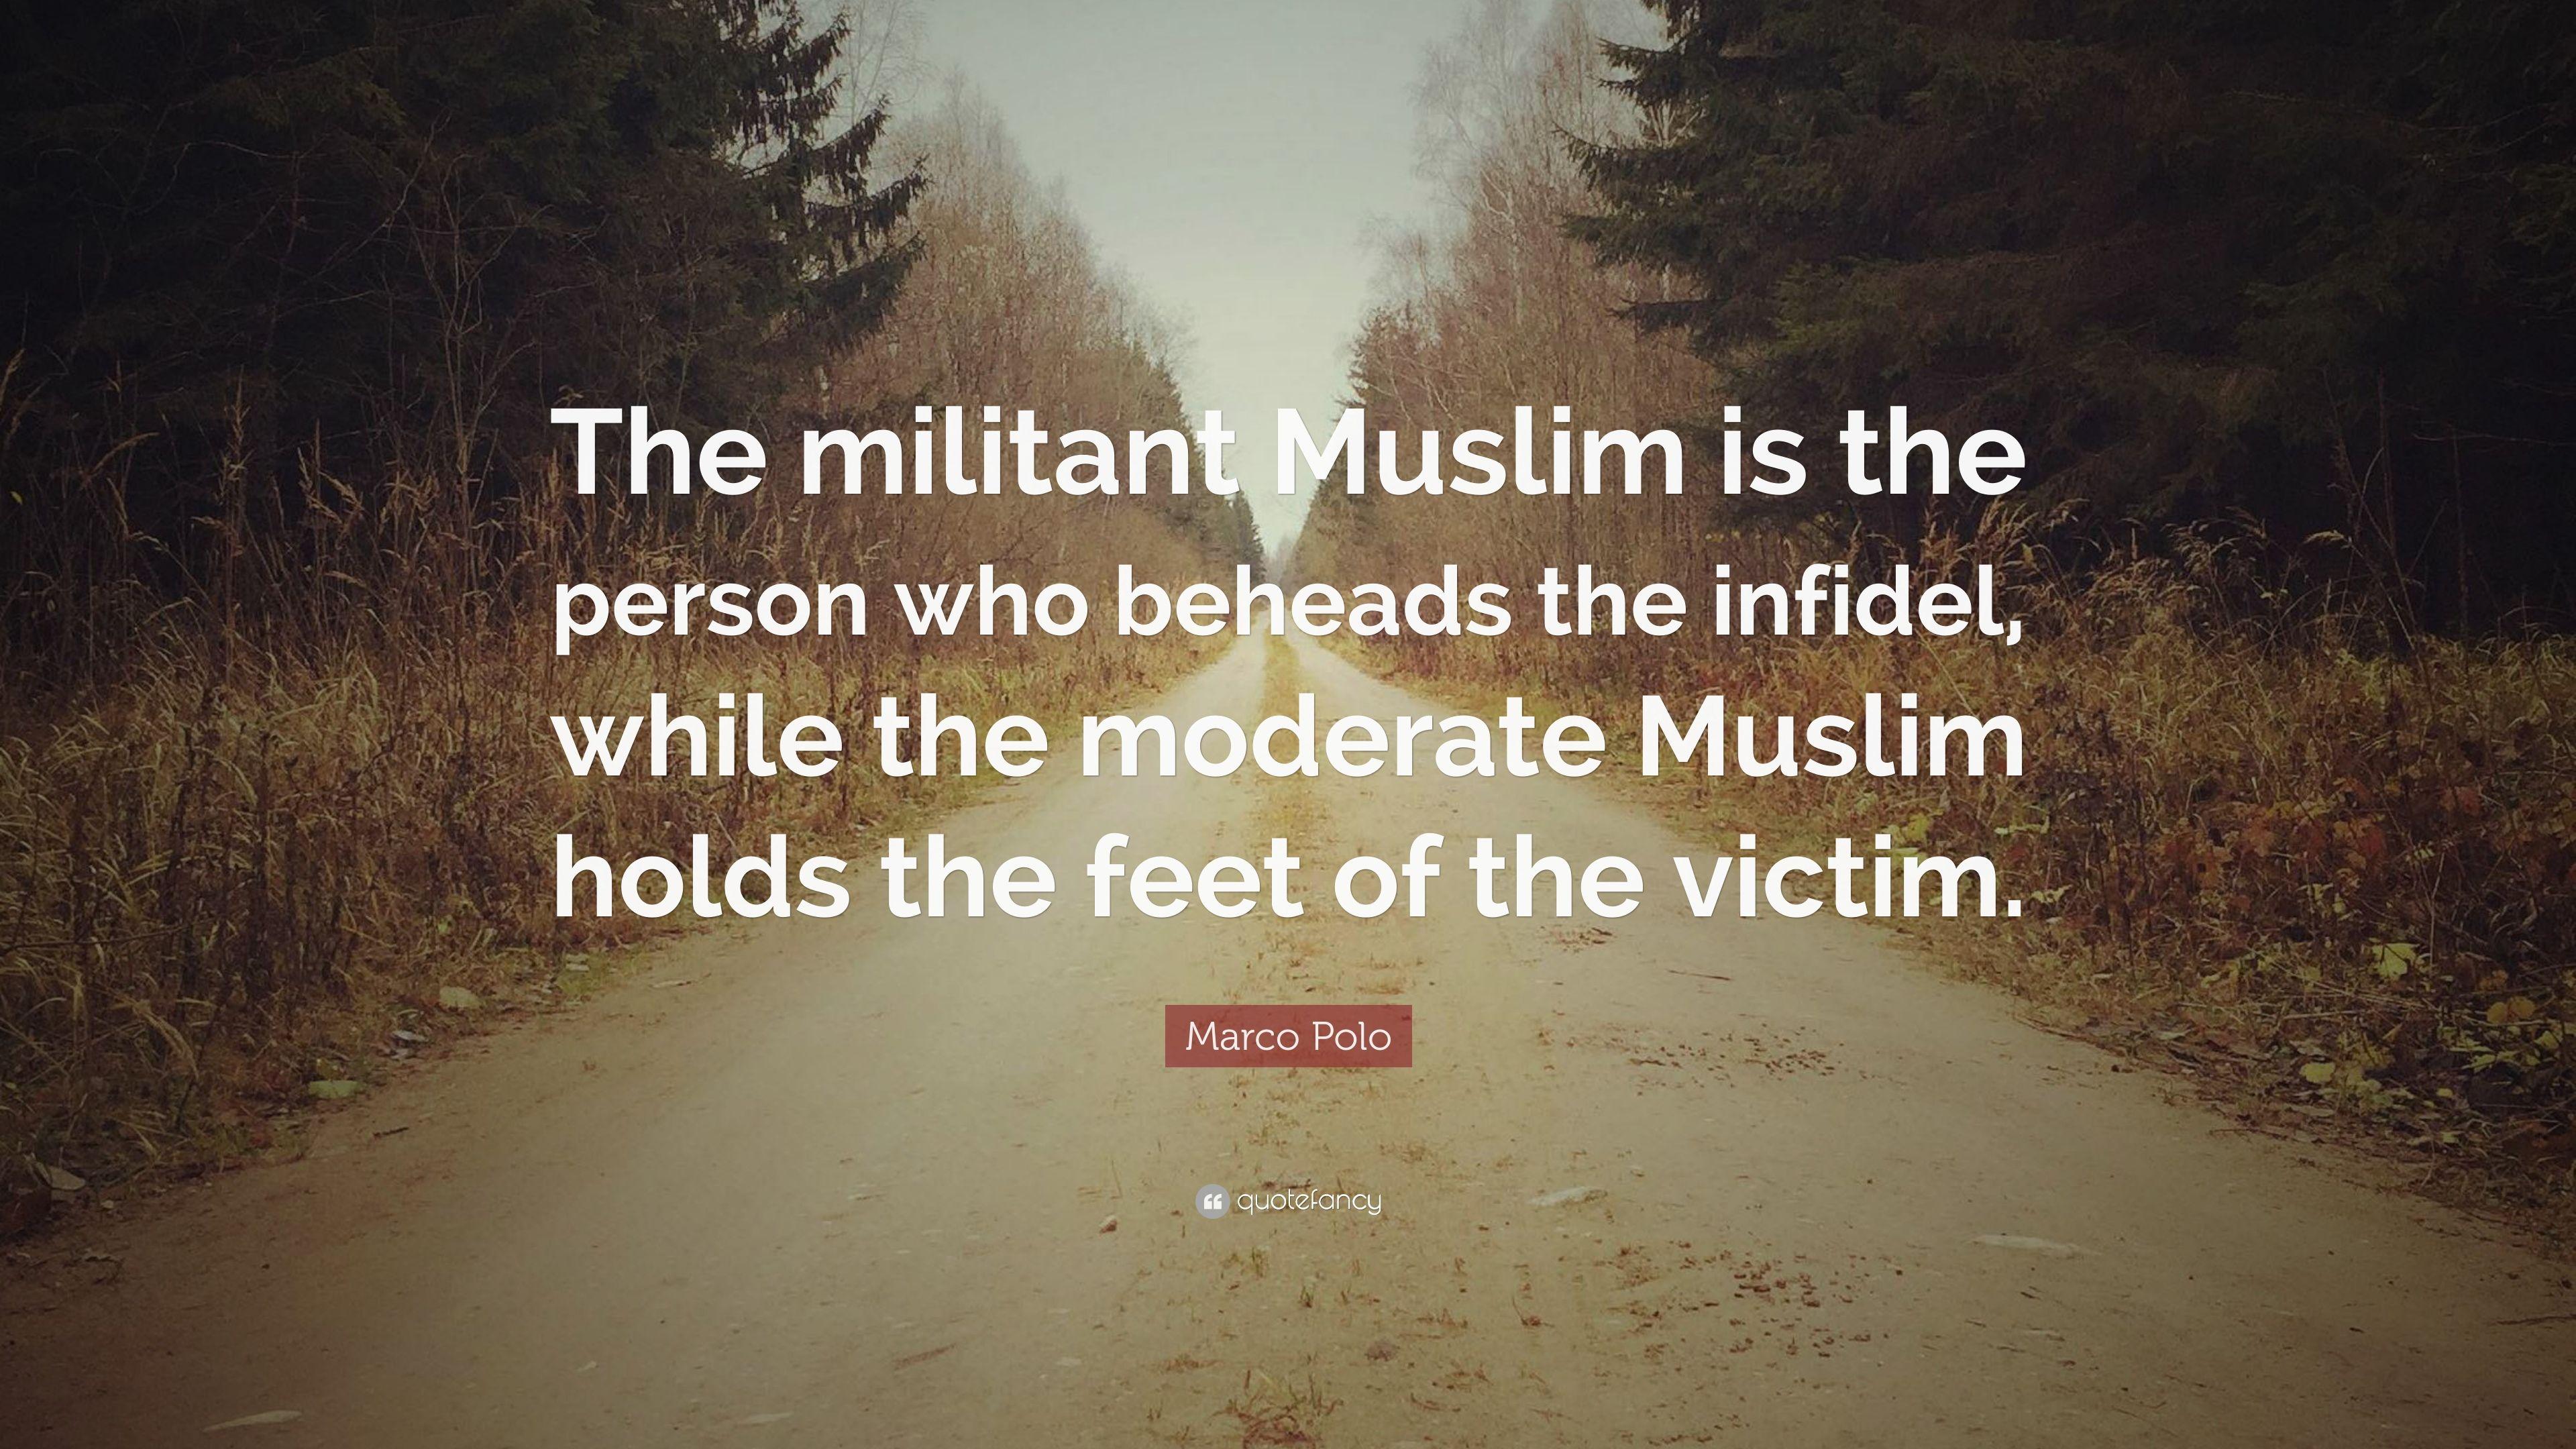 Marco Polo Quote: “The militant Muslim is the person who beheads